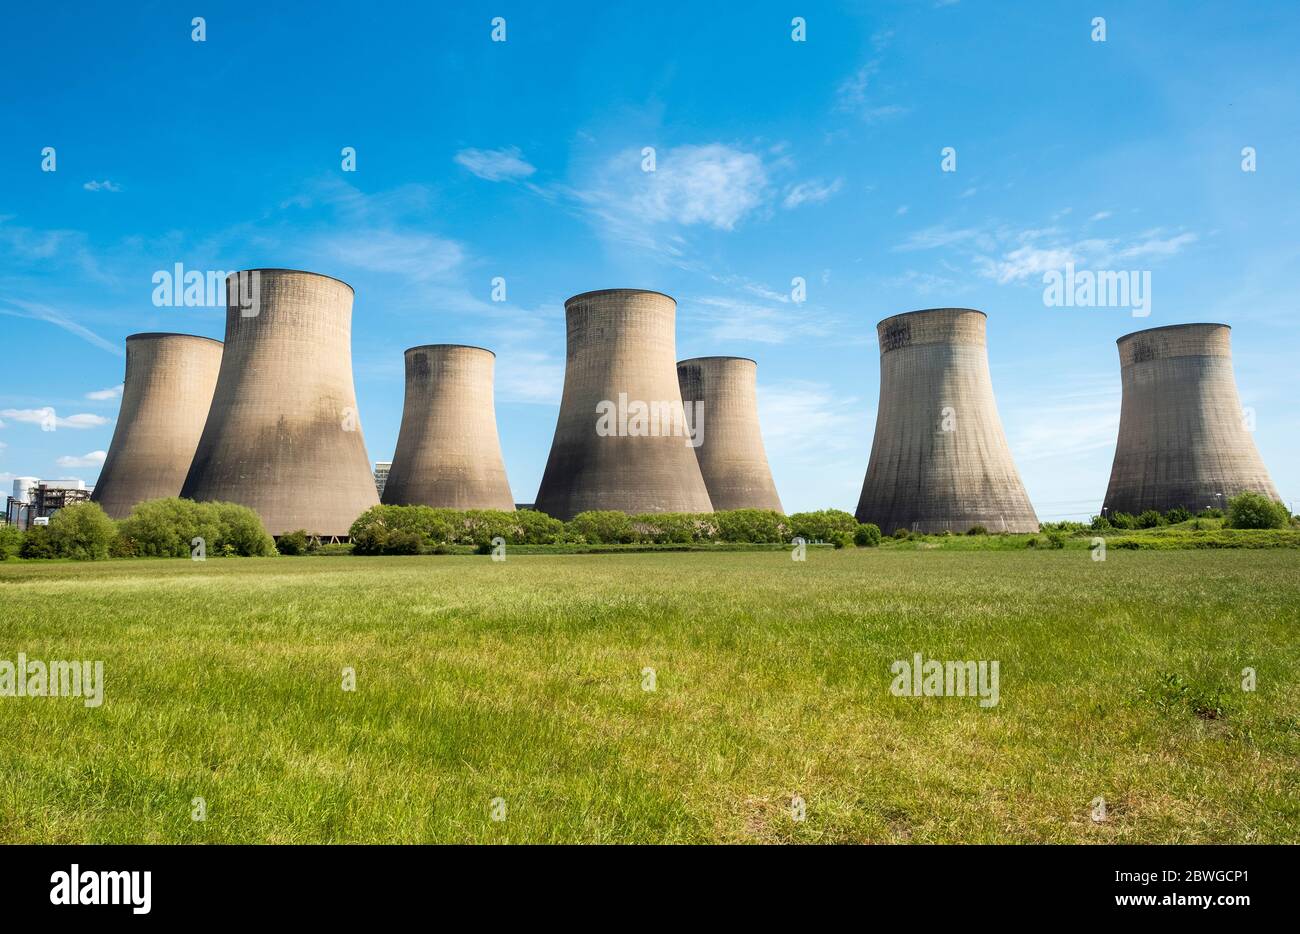 Ratcliffe on Soar power station cooling towers Stock Photo